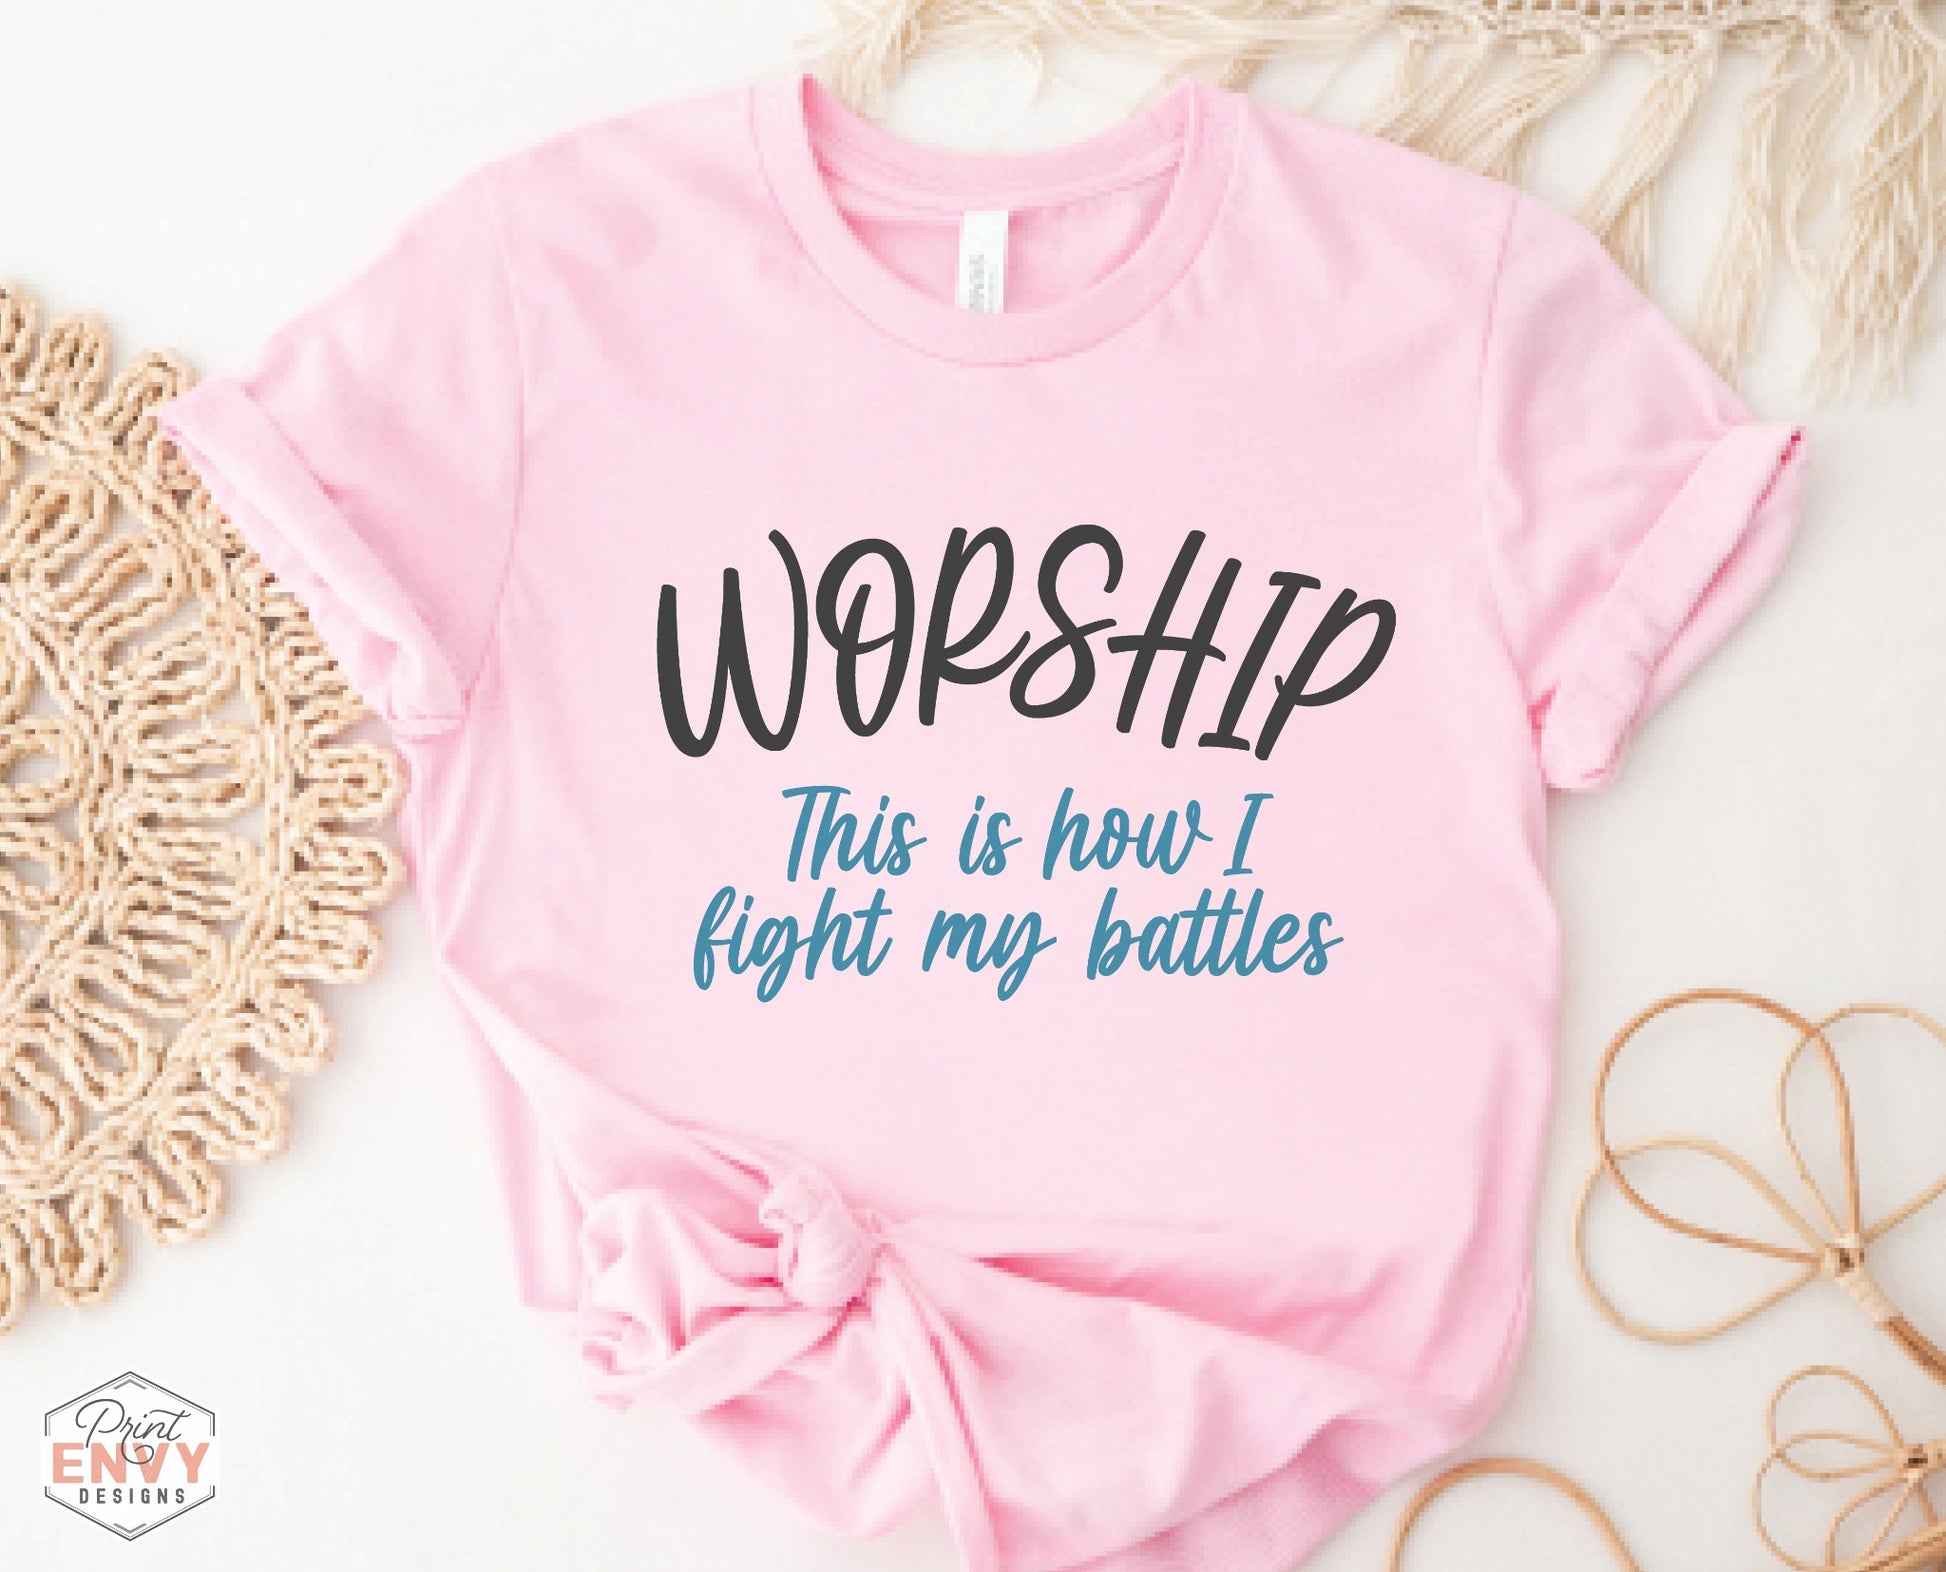 Worship This Is How I Fight My Battles Christian aesthetic t-shirt design printed on soft pink tee for women, great gift for worship leaders